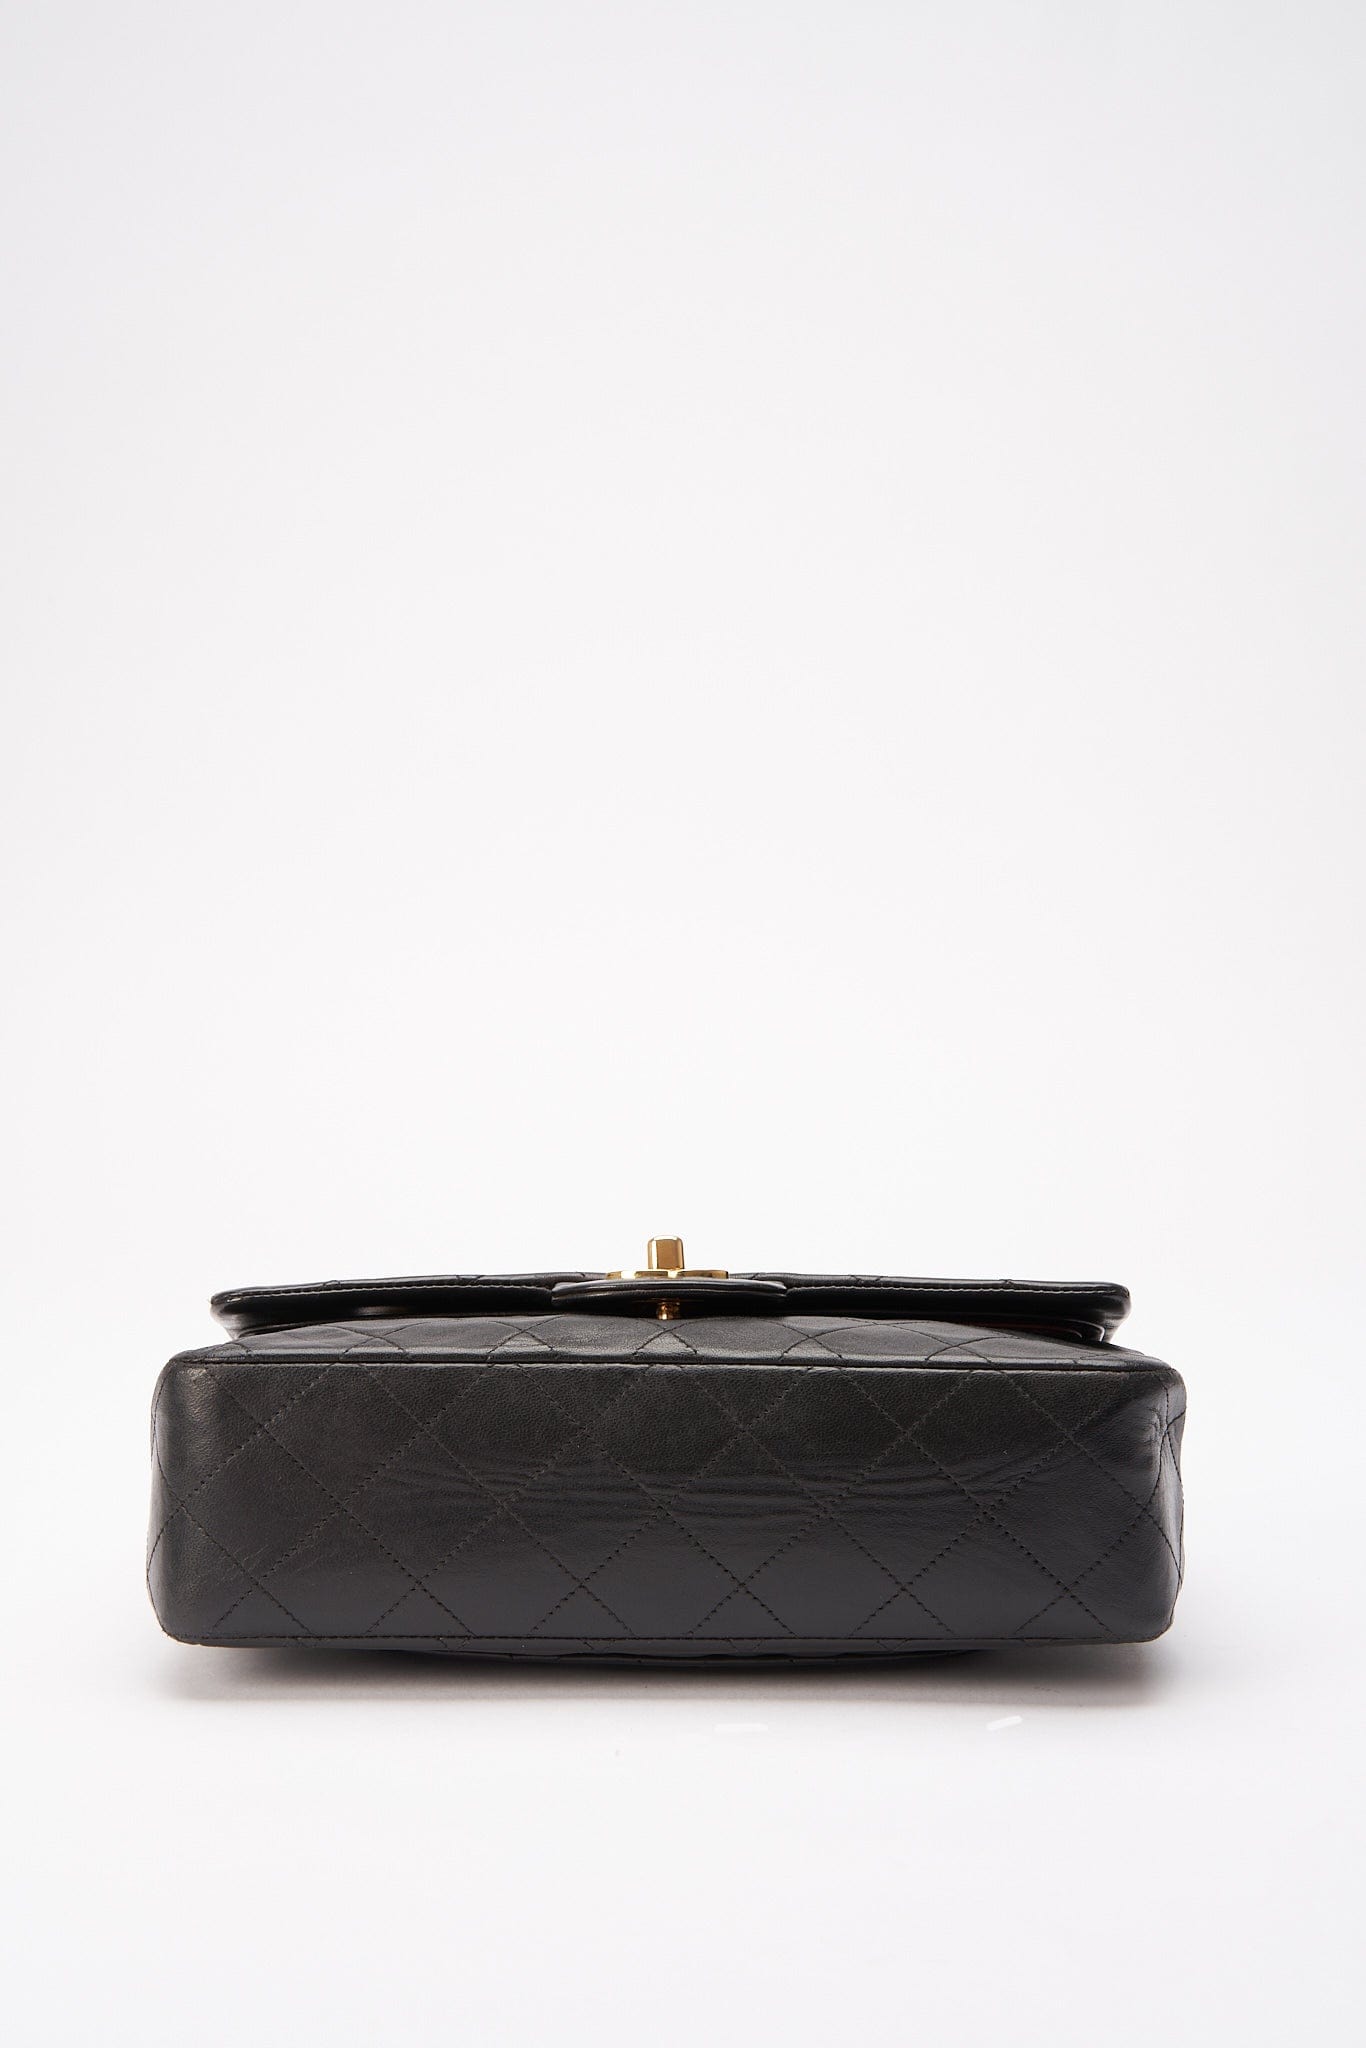 Chanel Classic Double Flap Bag Small Black Lambskin Leather